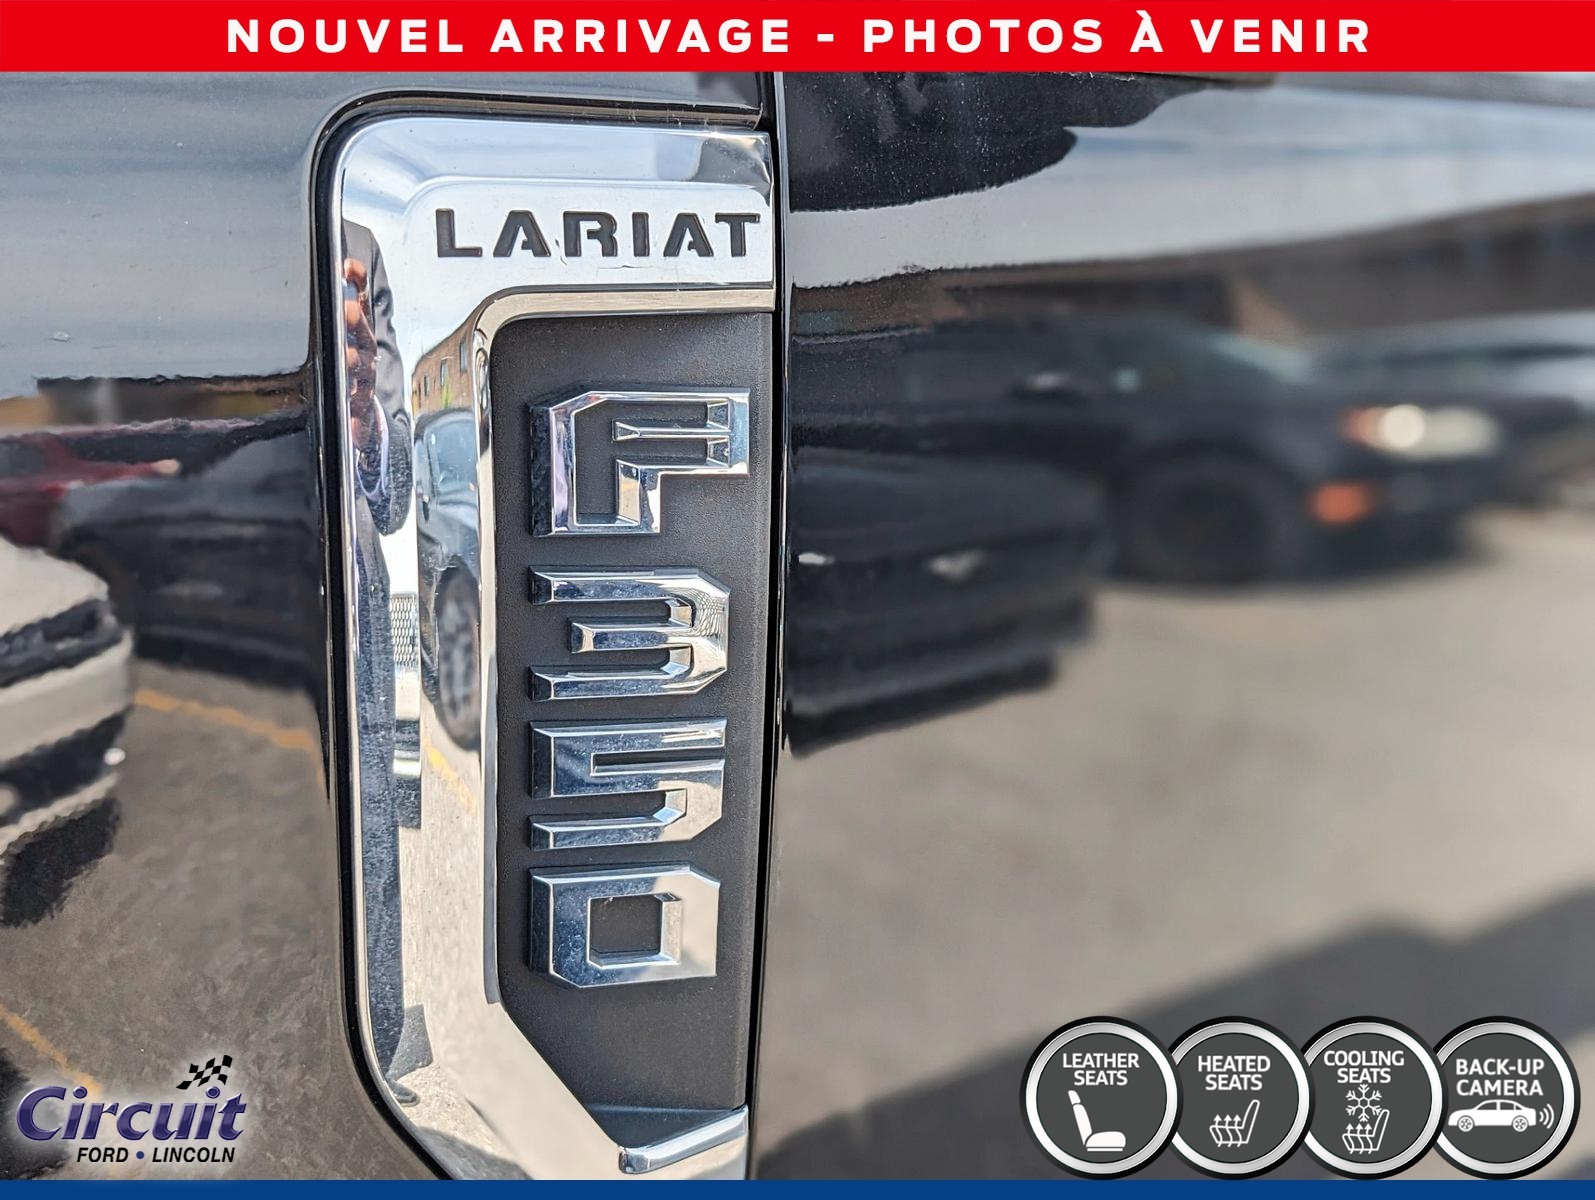 2017 Ford F-350 Lariat cabine double 4RM 148 po